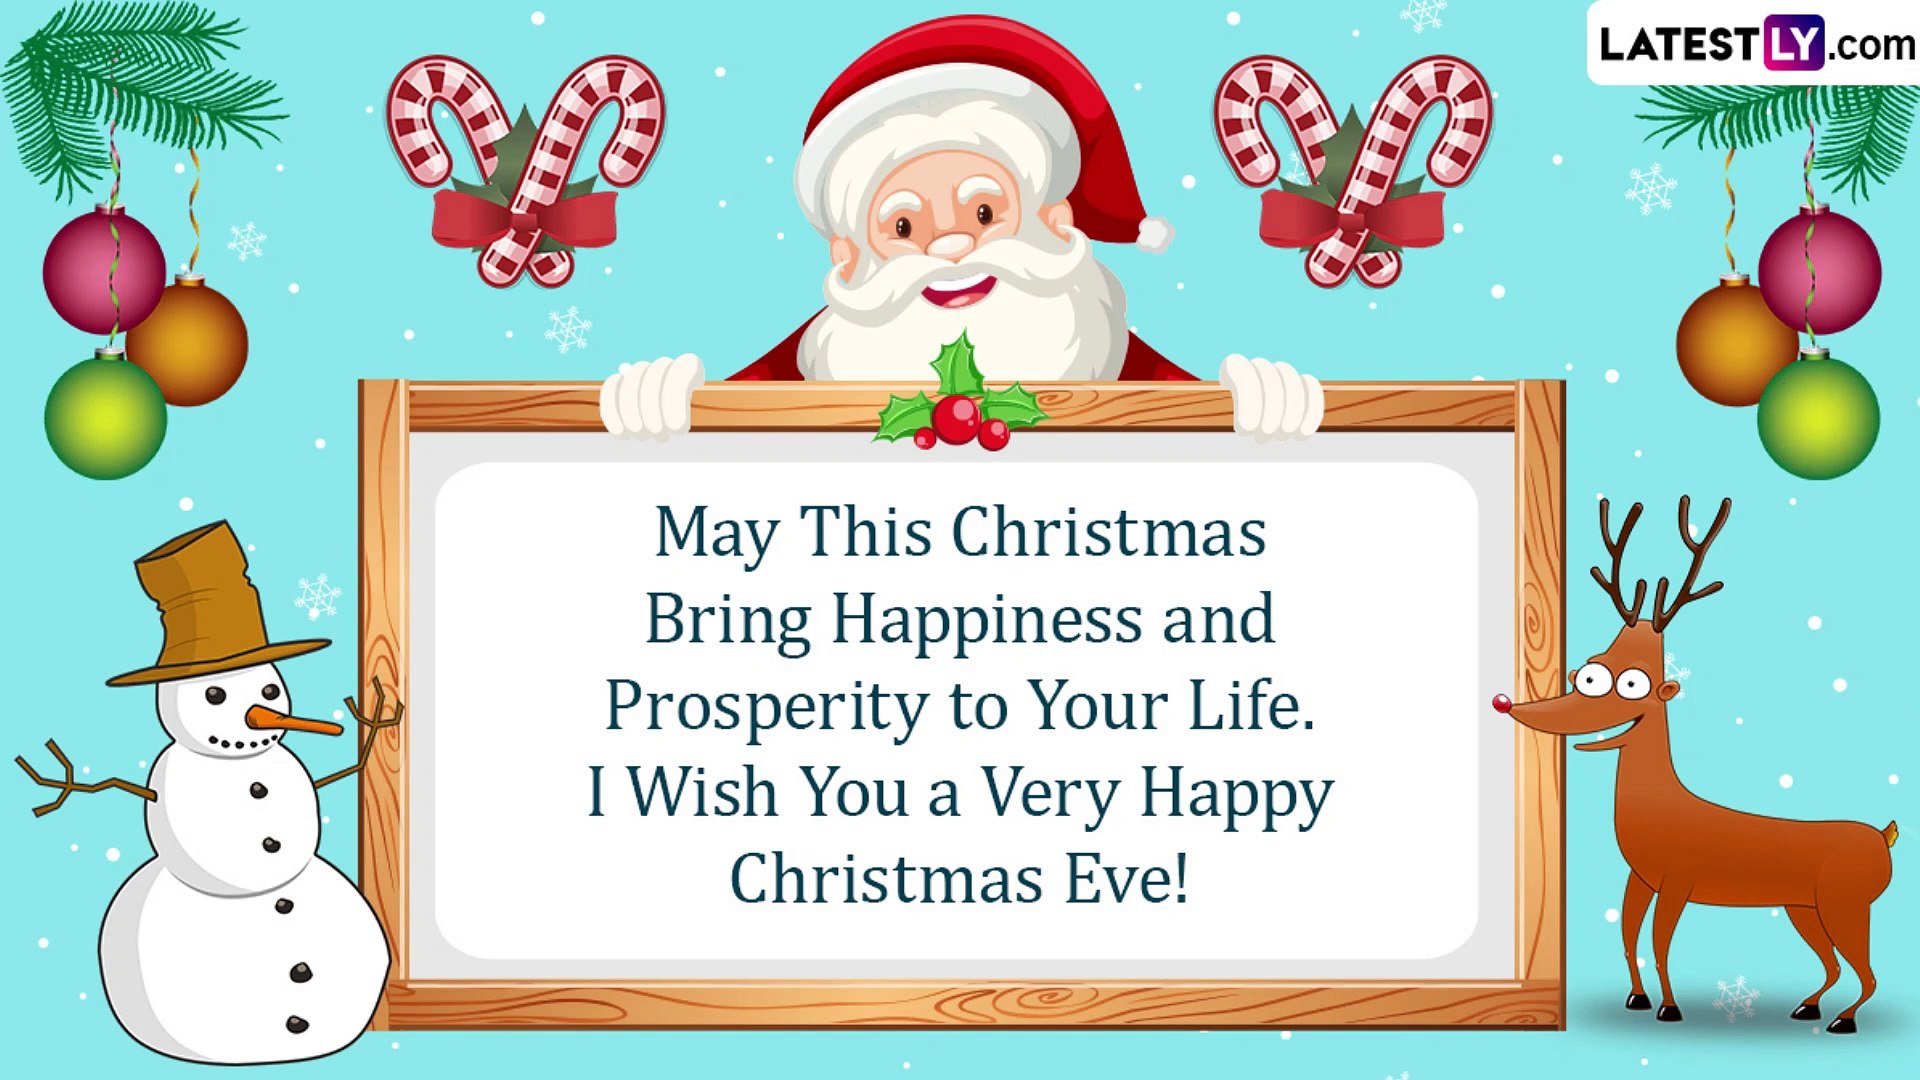 Merry Christmas Eve 2022 Greetings: Share Wishes, Messages and Images With  Your Loved Ones - video Dailymotion